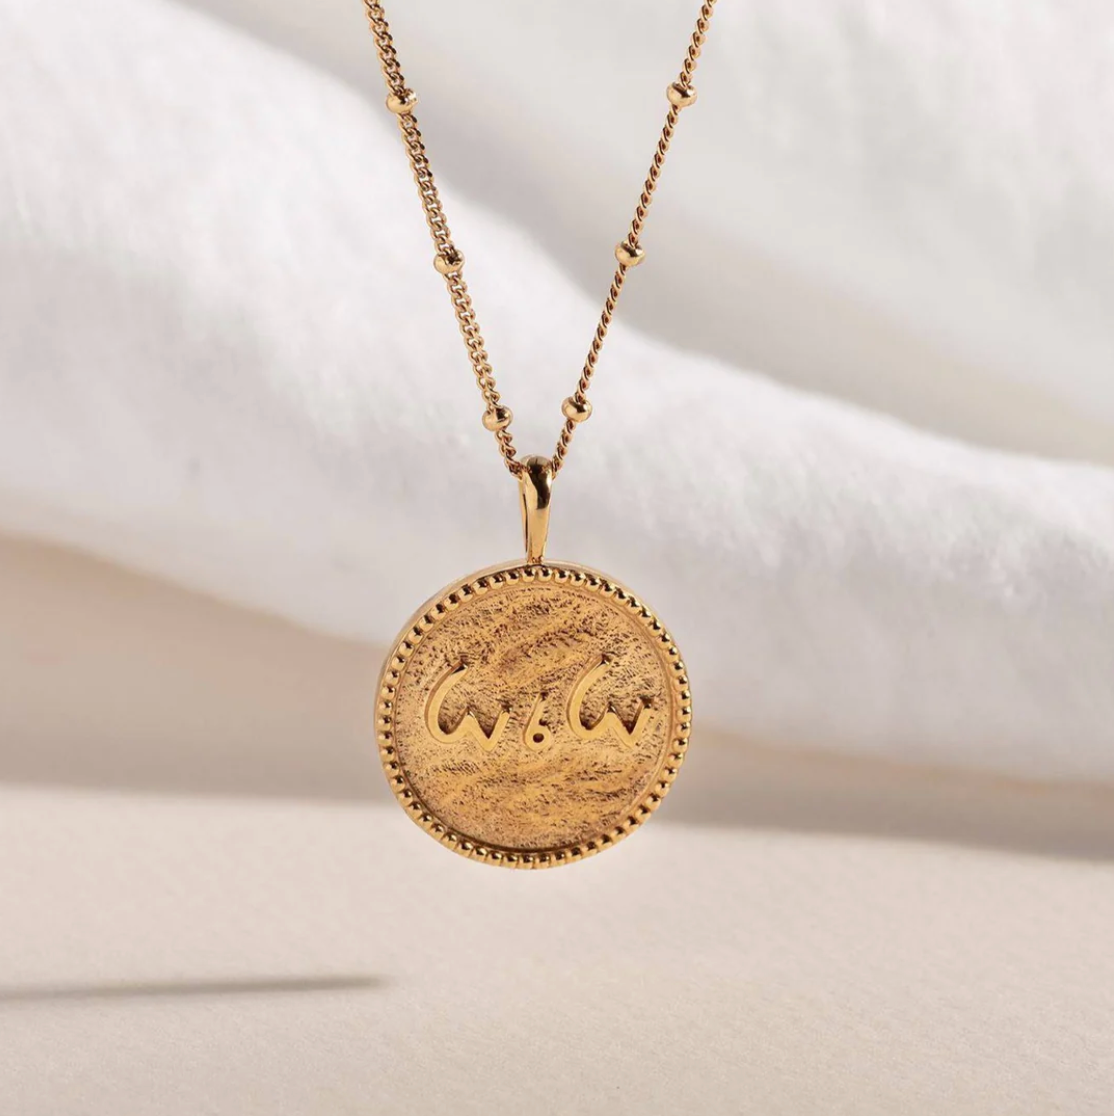 CLAIRE HILL DESIGNS "LOVE IS LOVE" SHORTHAND COIN NECKLACE